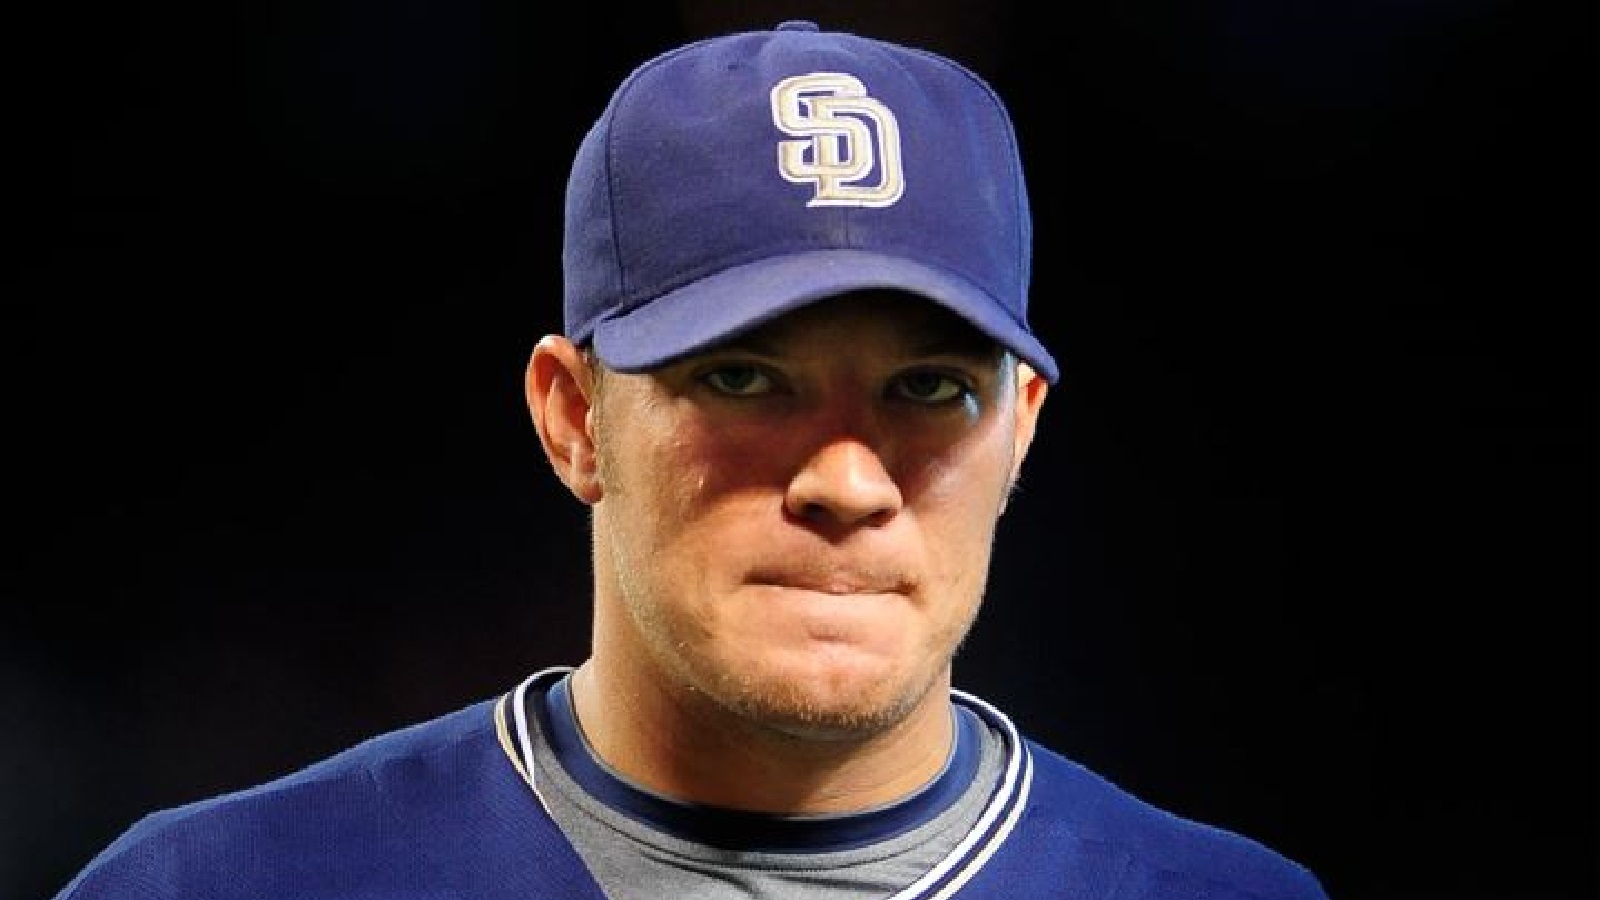 Padres history (Aug. 27): Jake Peavy, San Diego's all-time